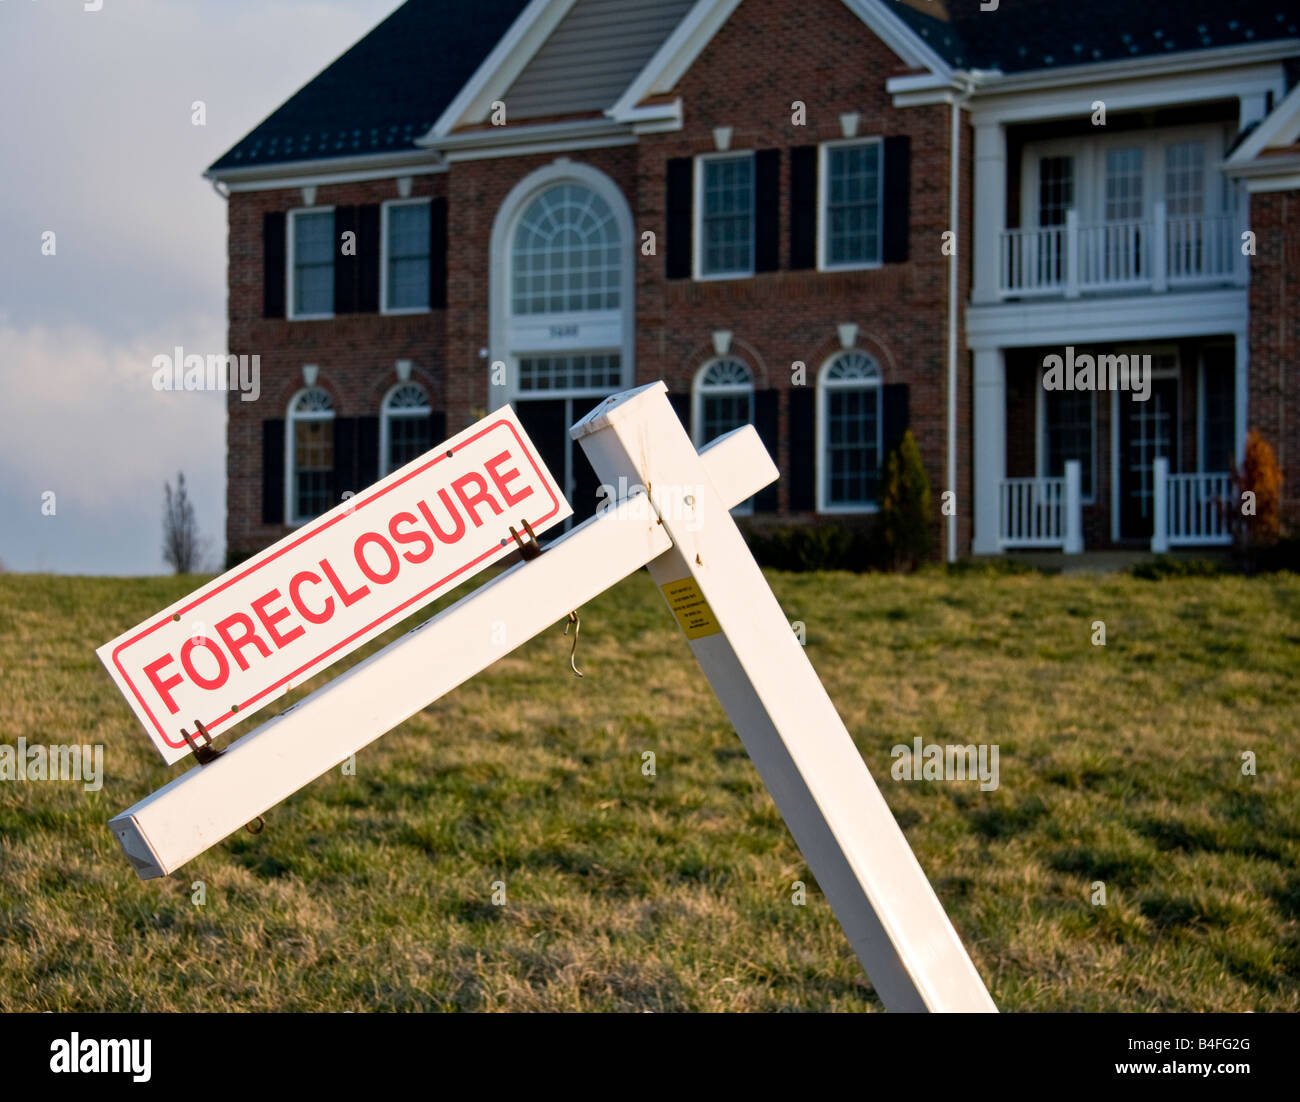 Foreclosure sign in front of a large single family home Stock Photo